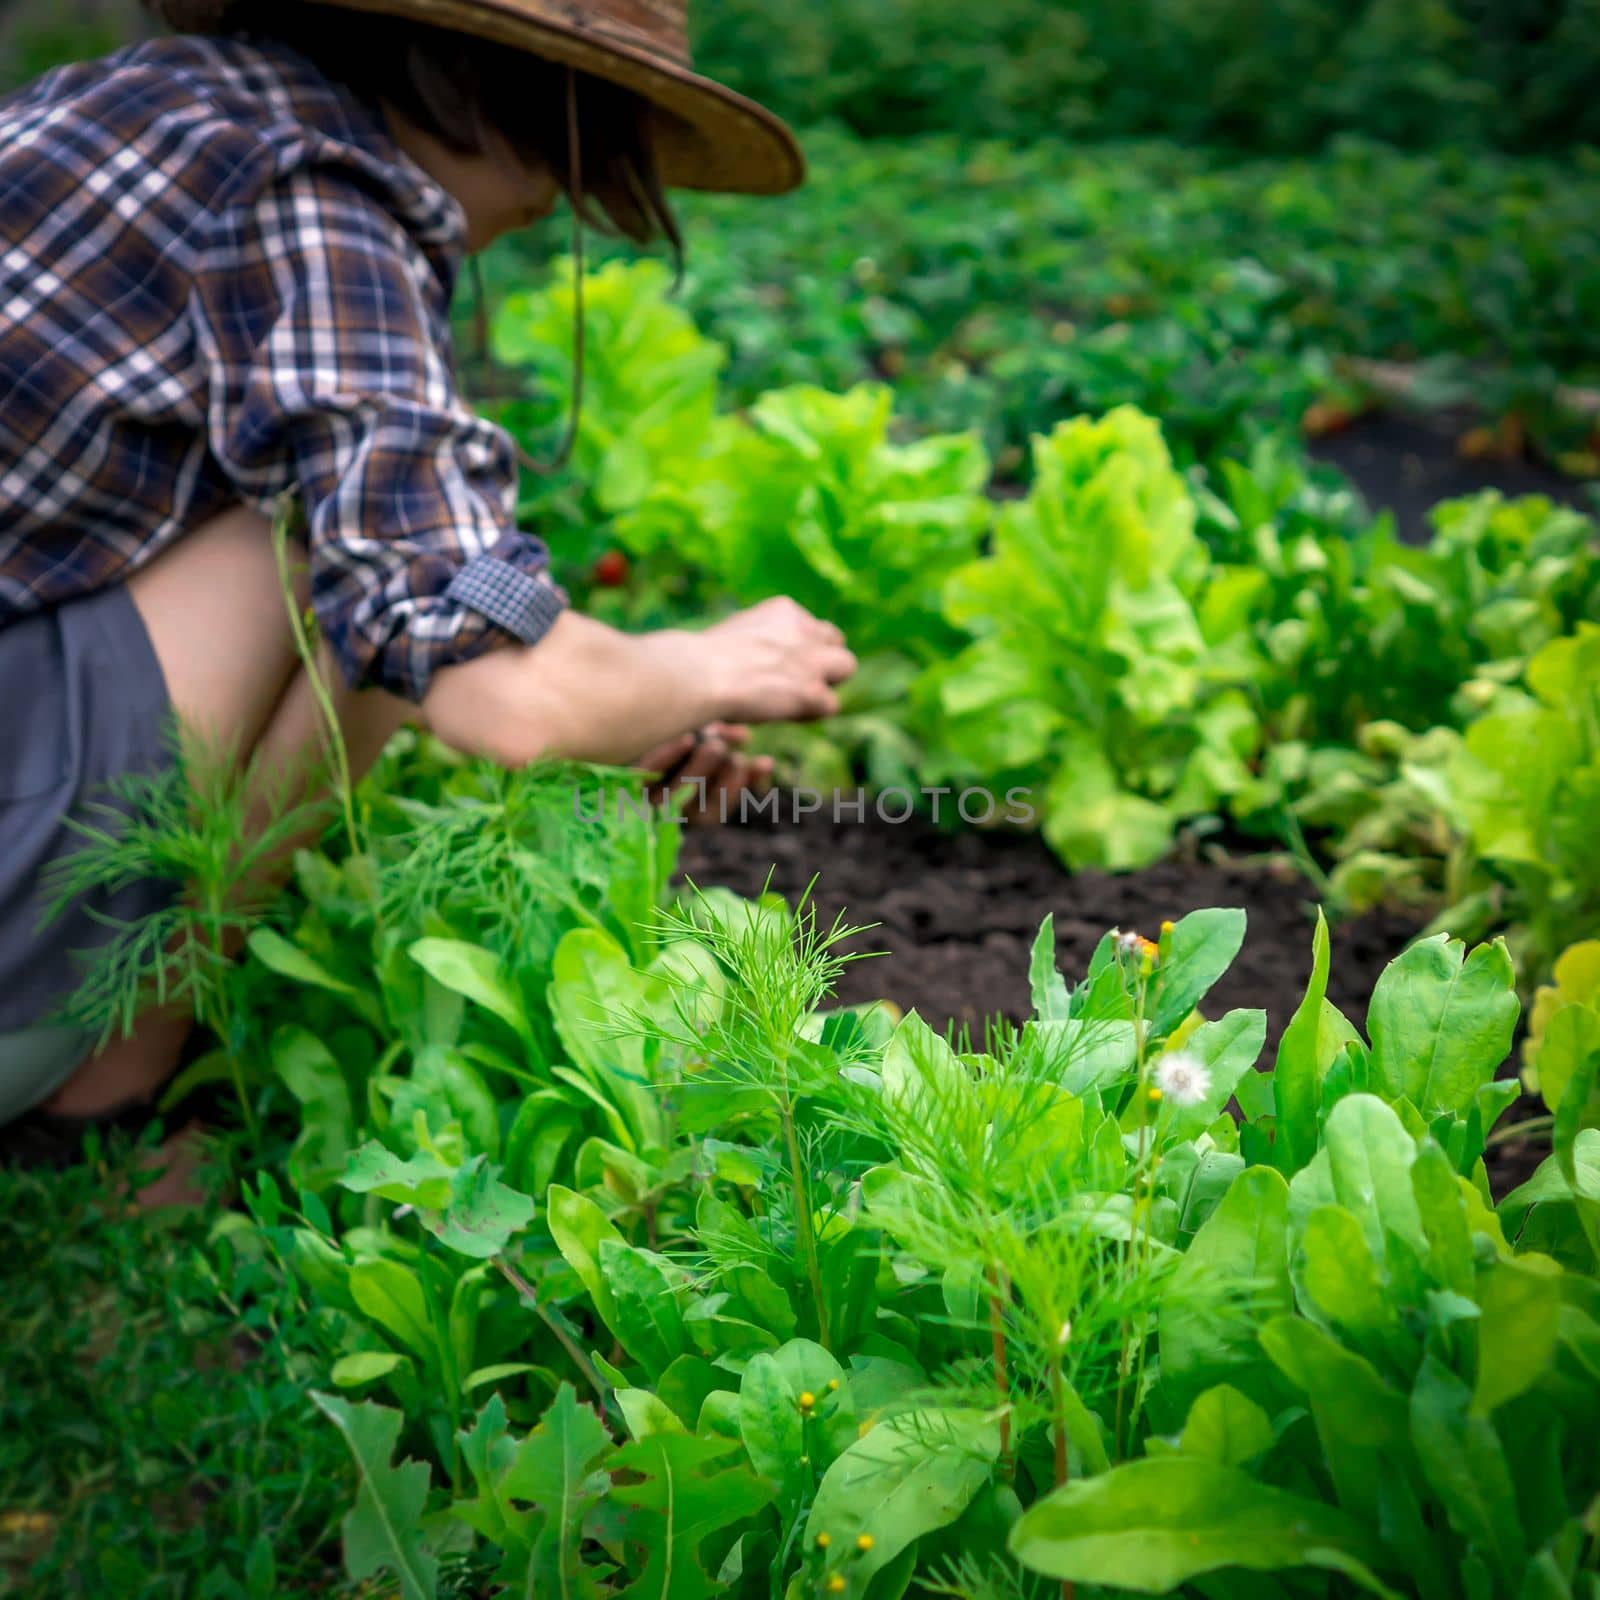 Young woman is involved in gardening work, planting plants, taking care of her vegetable garden, harvesting fresh herbs, spinach and lettuce. Farmer in a straw hat prepares the soil for the seedling.